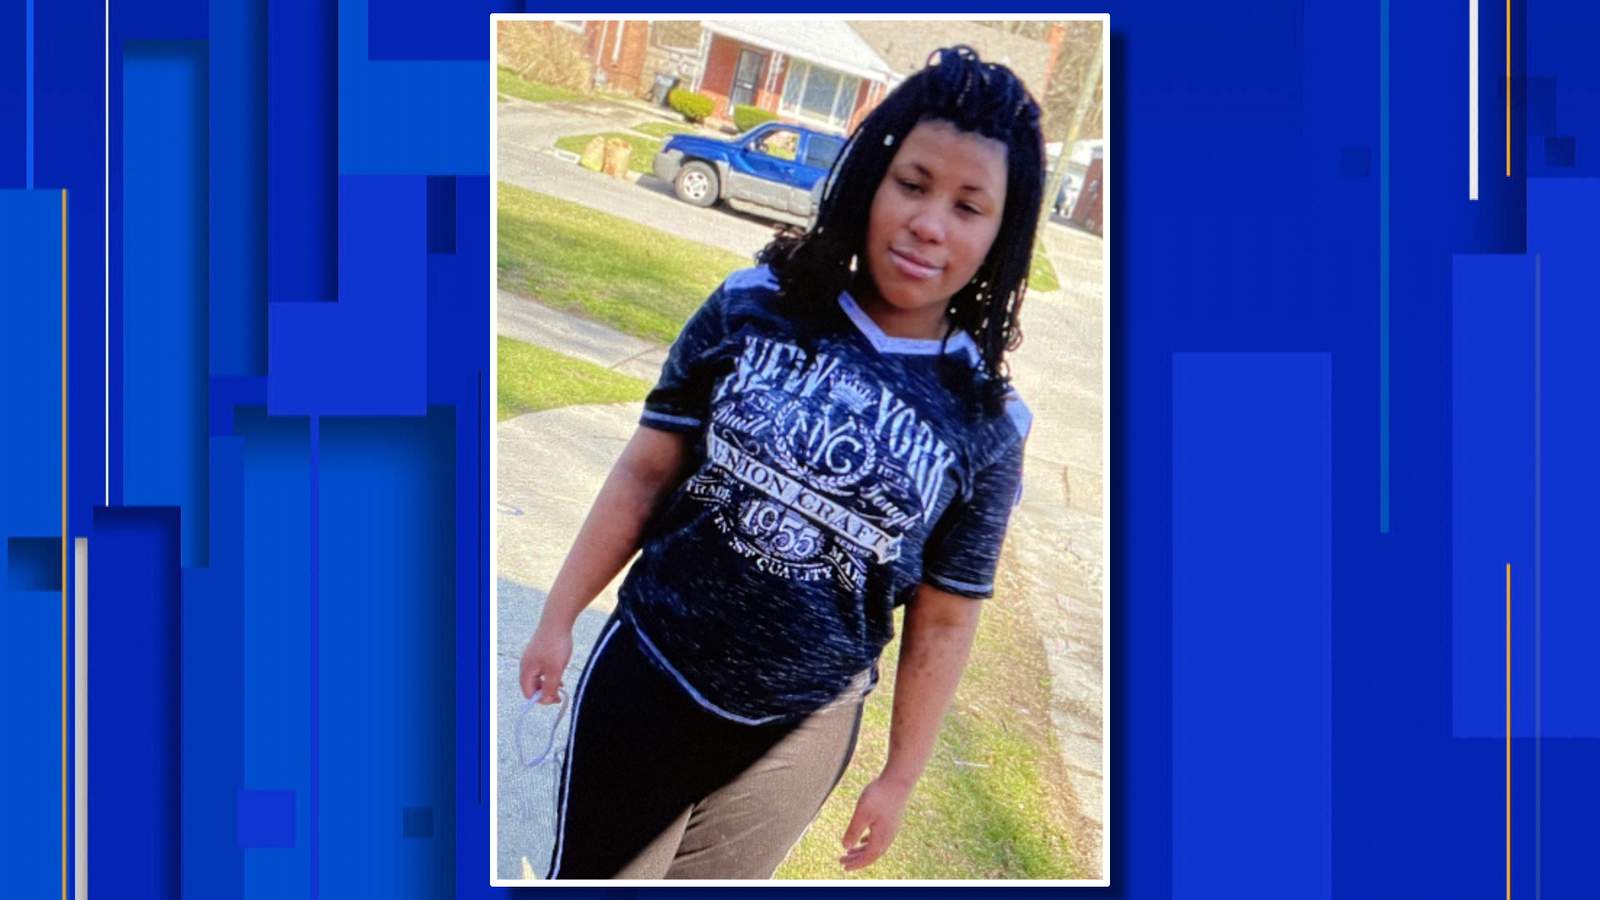 14-year-old girl who went missing found safe, Detroit police say